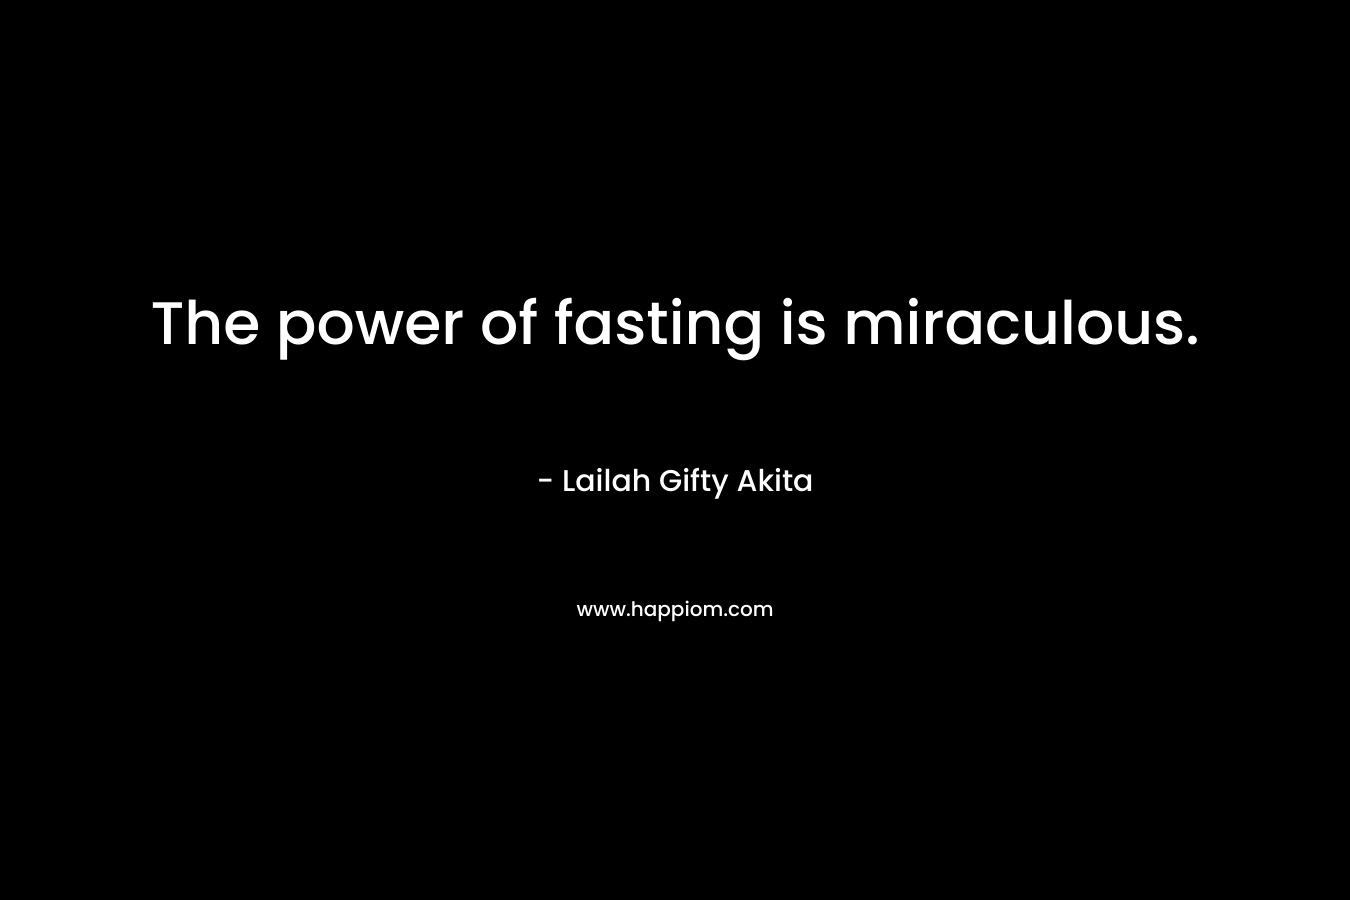 The power of fasting is miraculous. – Lailah Gifty Akita